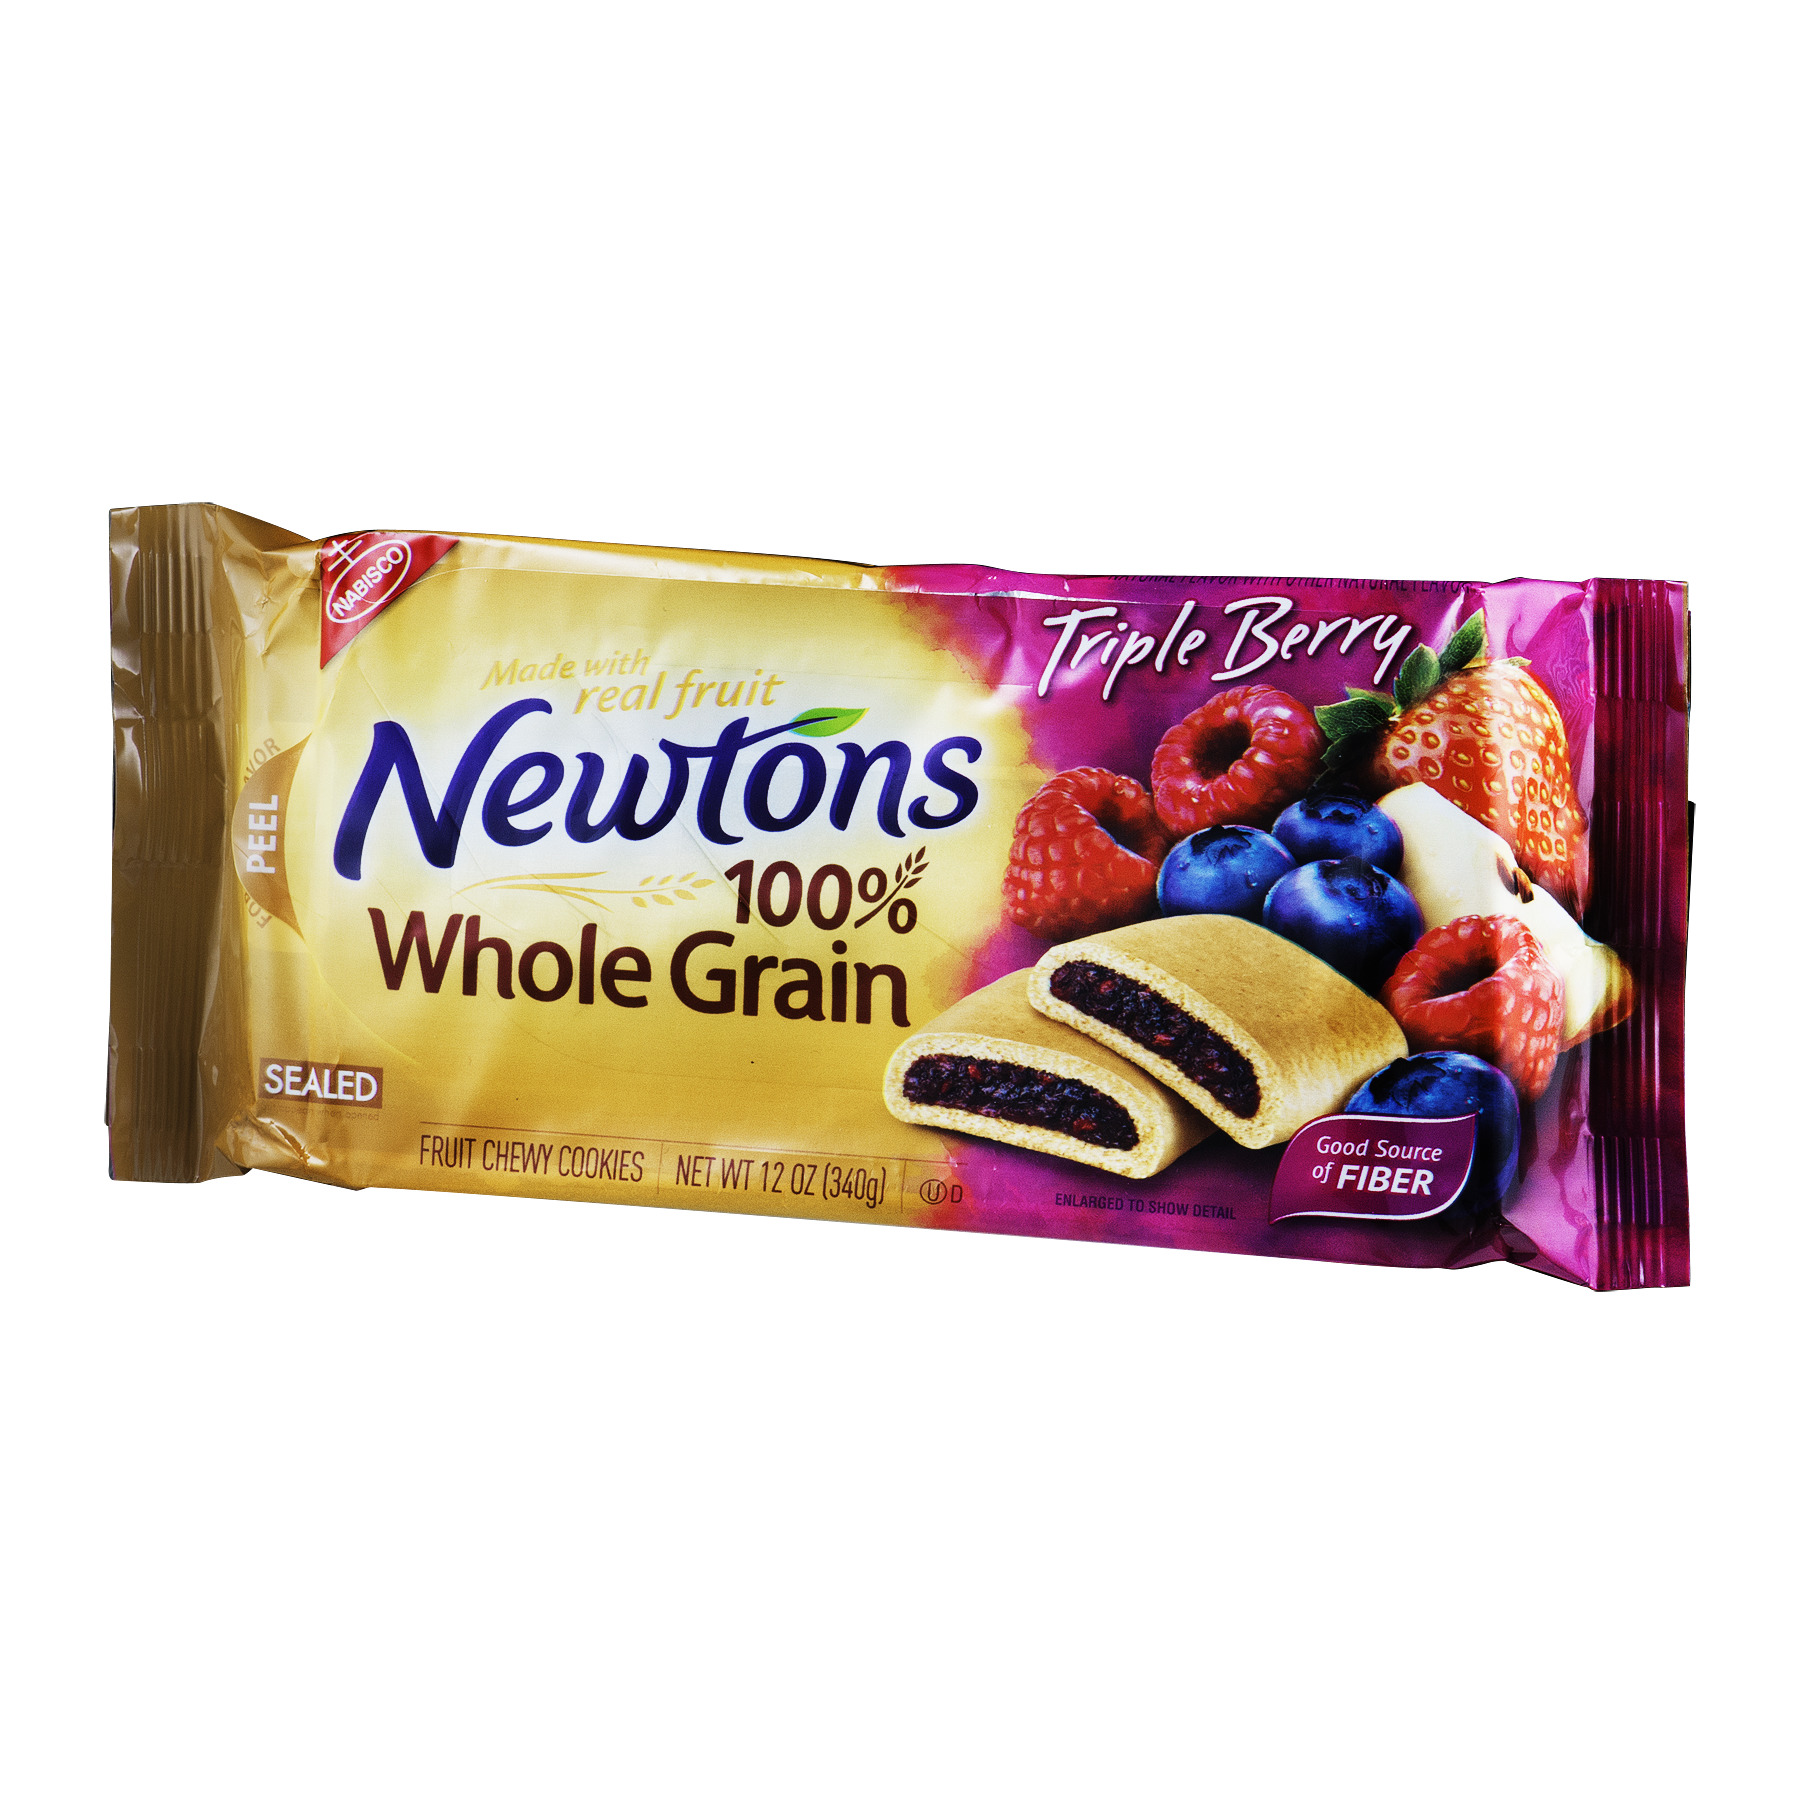 Nabisco Newtons Whole Triple Berry Chewy Cookies, 12 Oz. - image 3 of 6